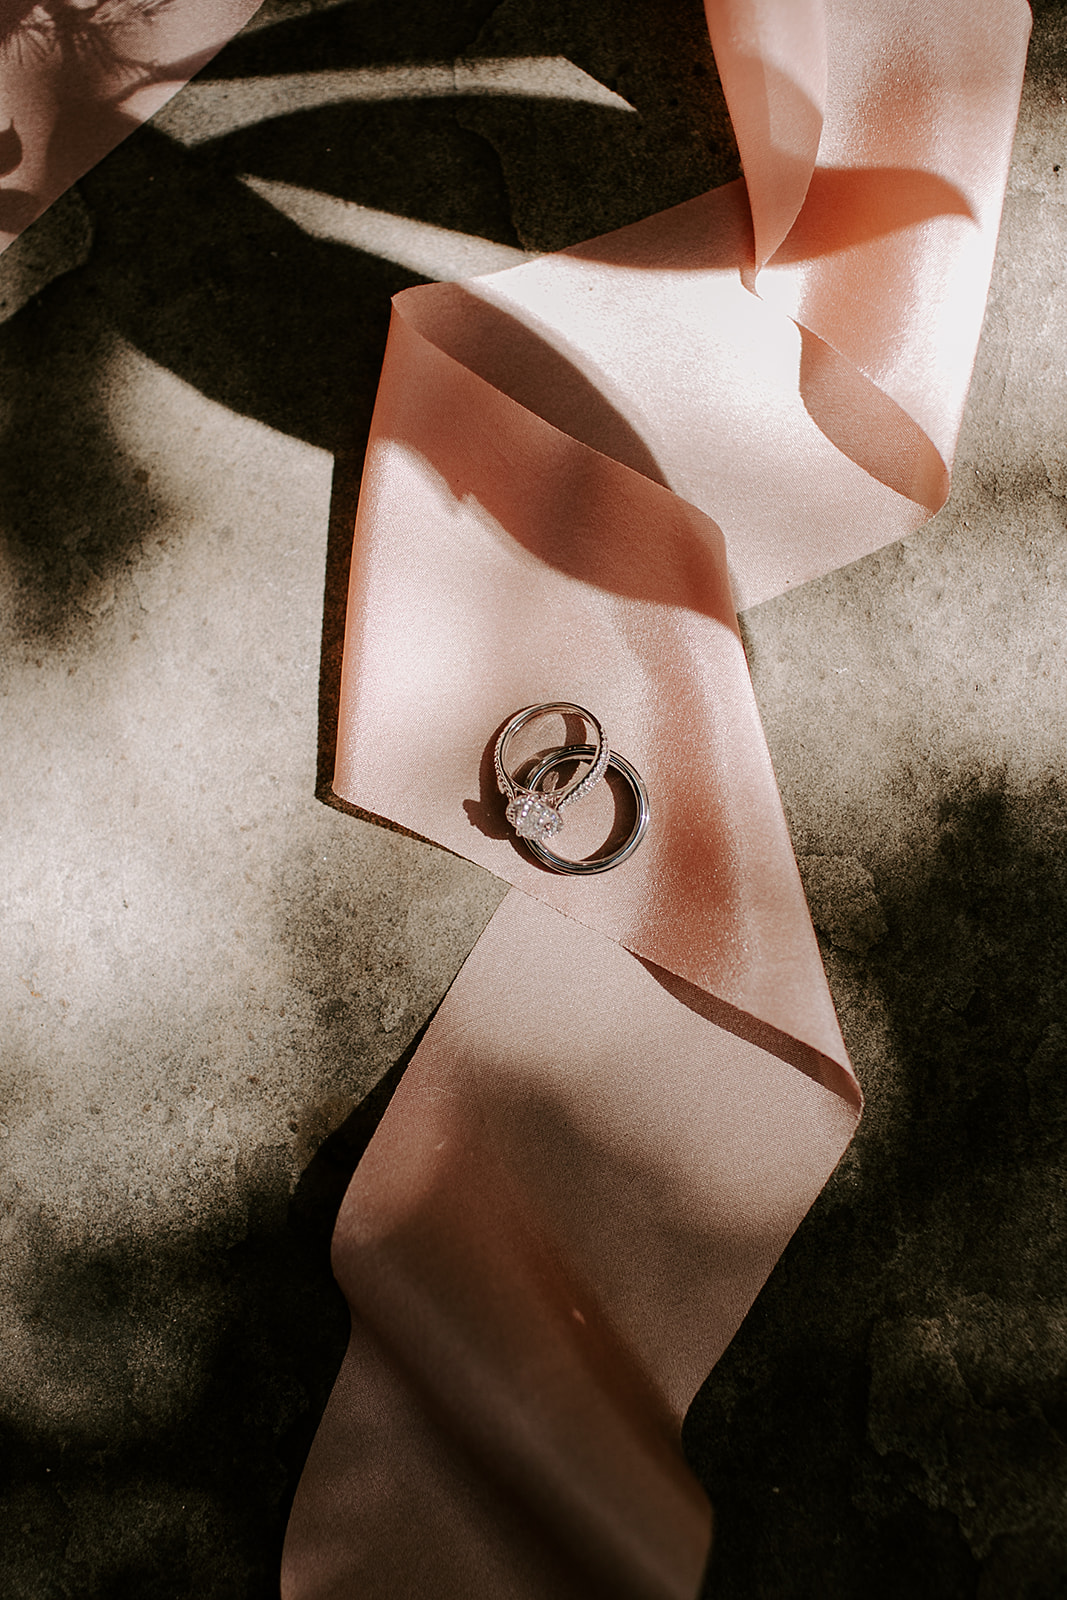 Wedding details inspiration including paper good and invites, wedding rings, wedding notes and jewellery | Photography by Emily Elyse Wehner, indiana based wedding photographer 